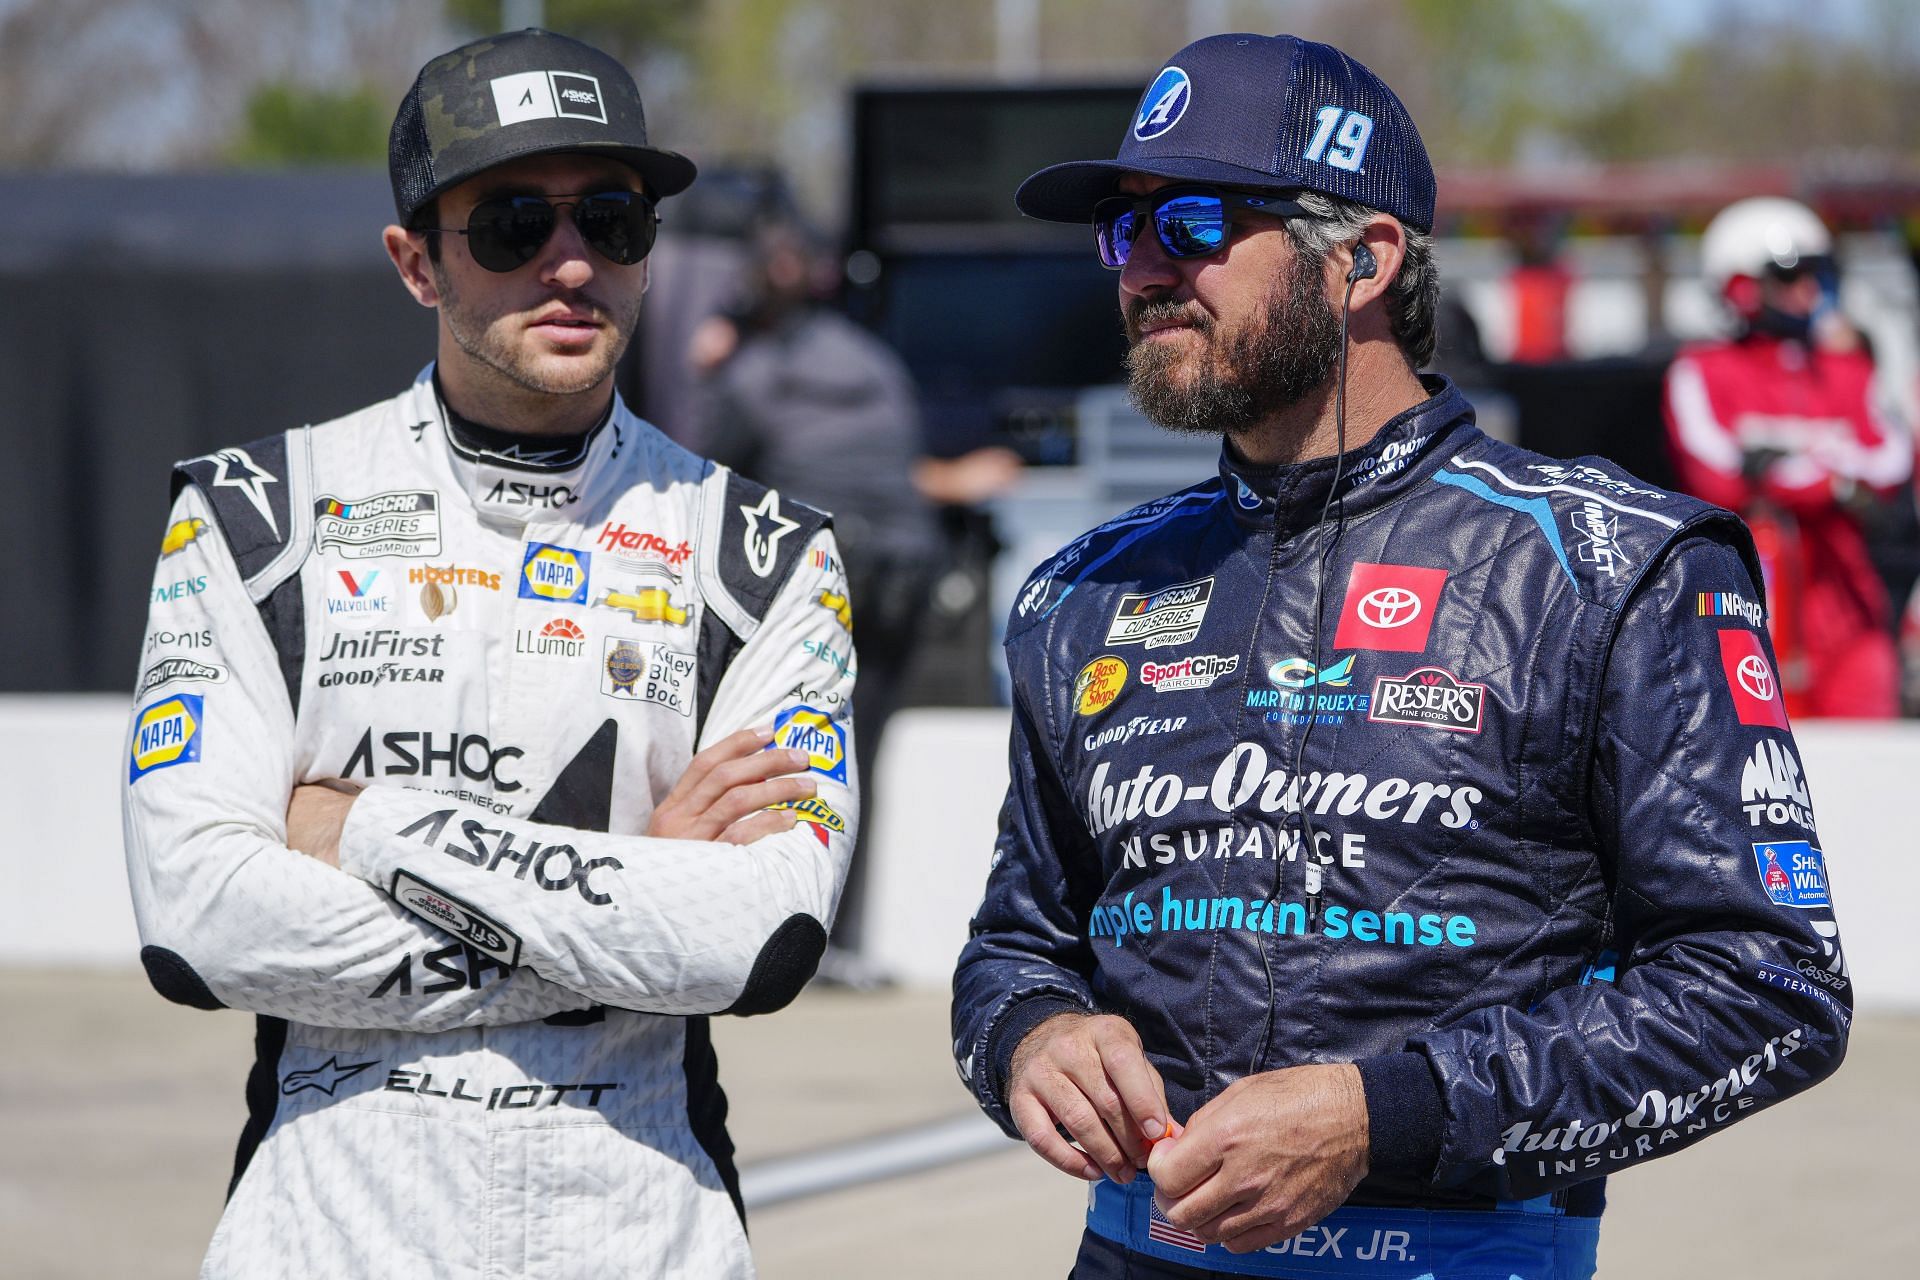 Chase Elliott (Left) and Martin Truex Jr. (Right) talk on the grid during qualifying for the NASCAR Cup Series Toyota Owners 400.